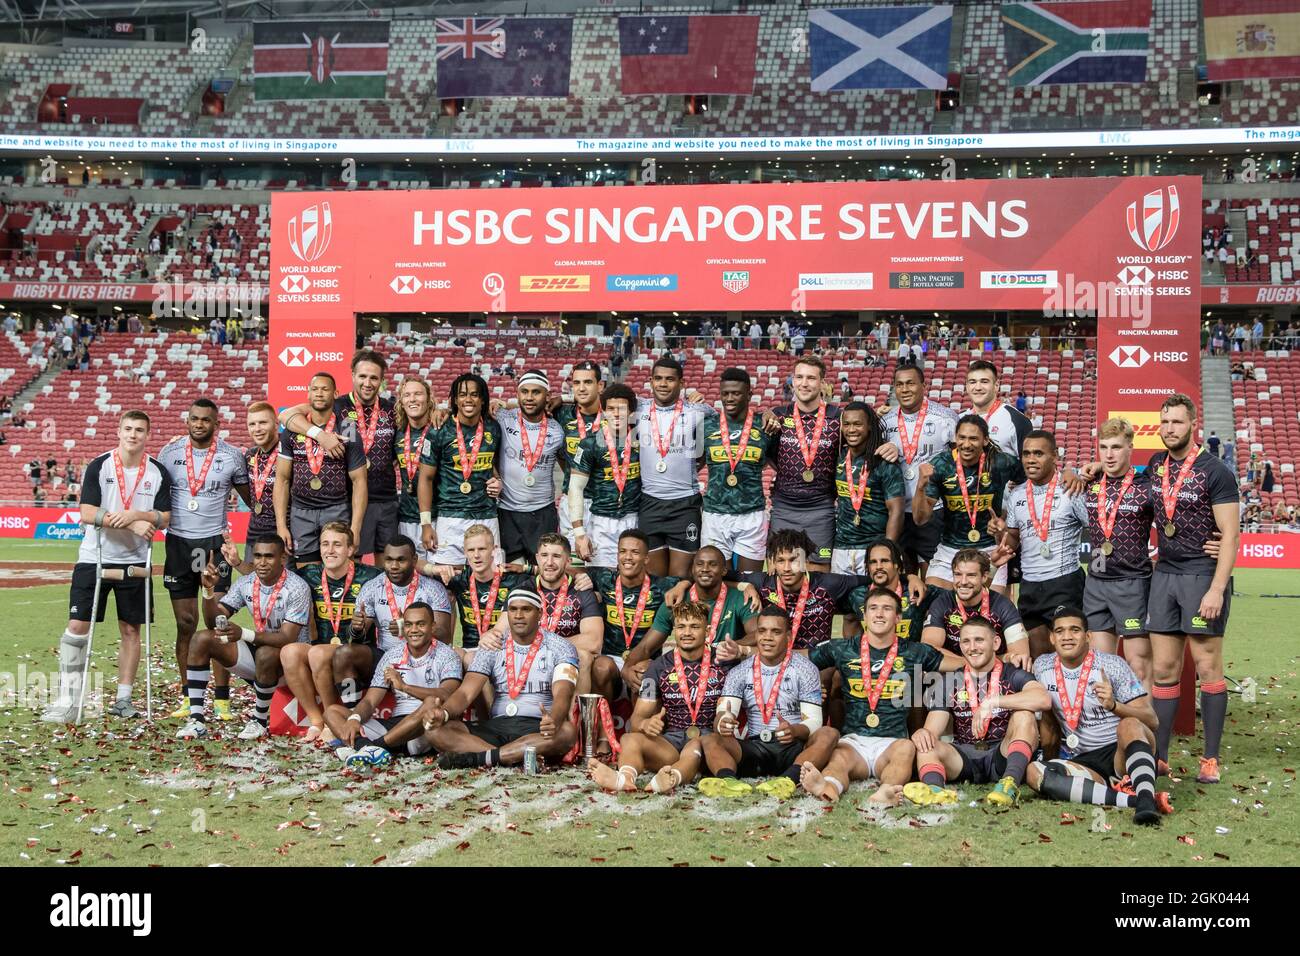 SINGAPORE-APRIL 14: Group photo of South Africa 7's Team (green), Fiji 7's Team (white) and England 7's Team (blue) on Day 2 of HSBC Singapore Sevens on April 14, 2019 at National Stadium in Singapore Stock Photo